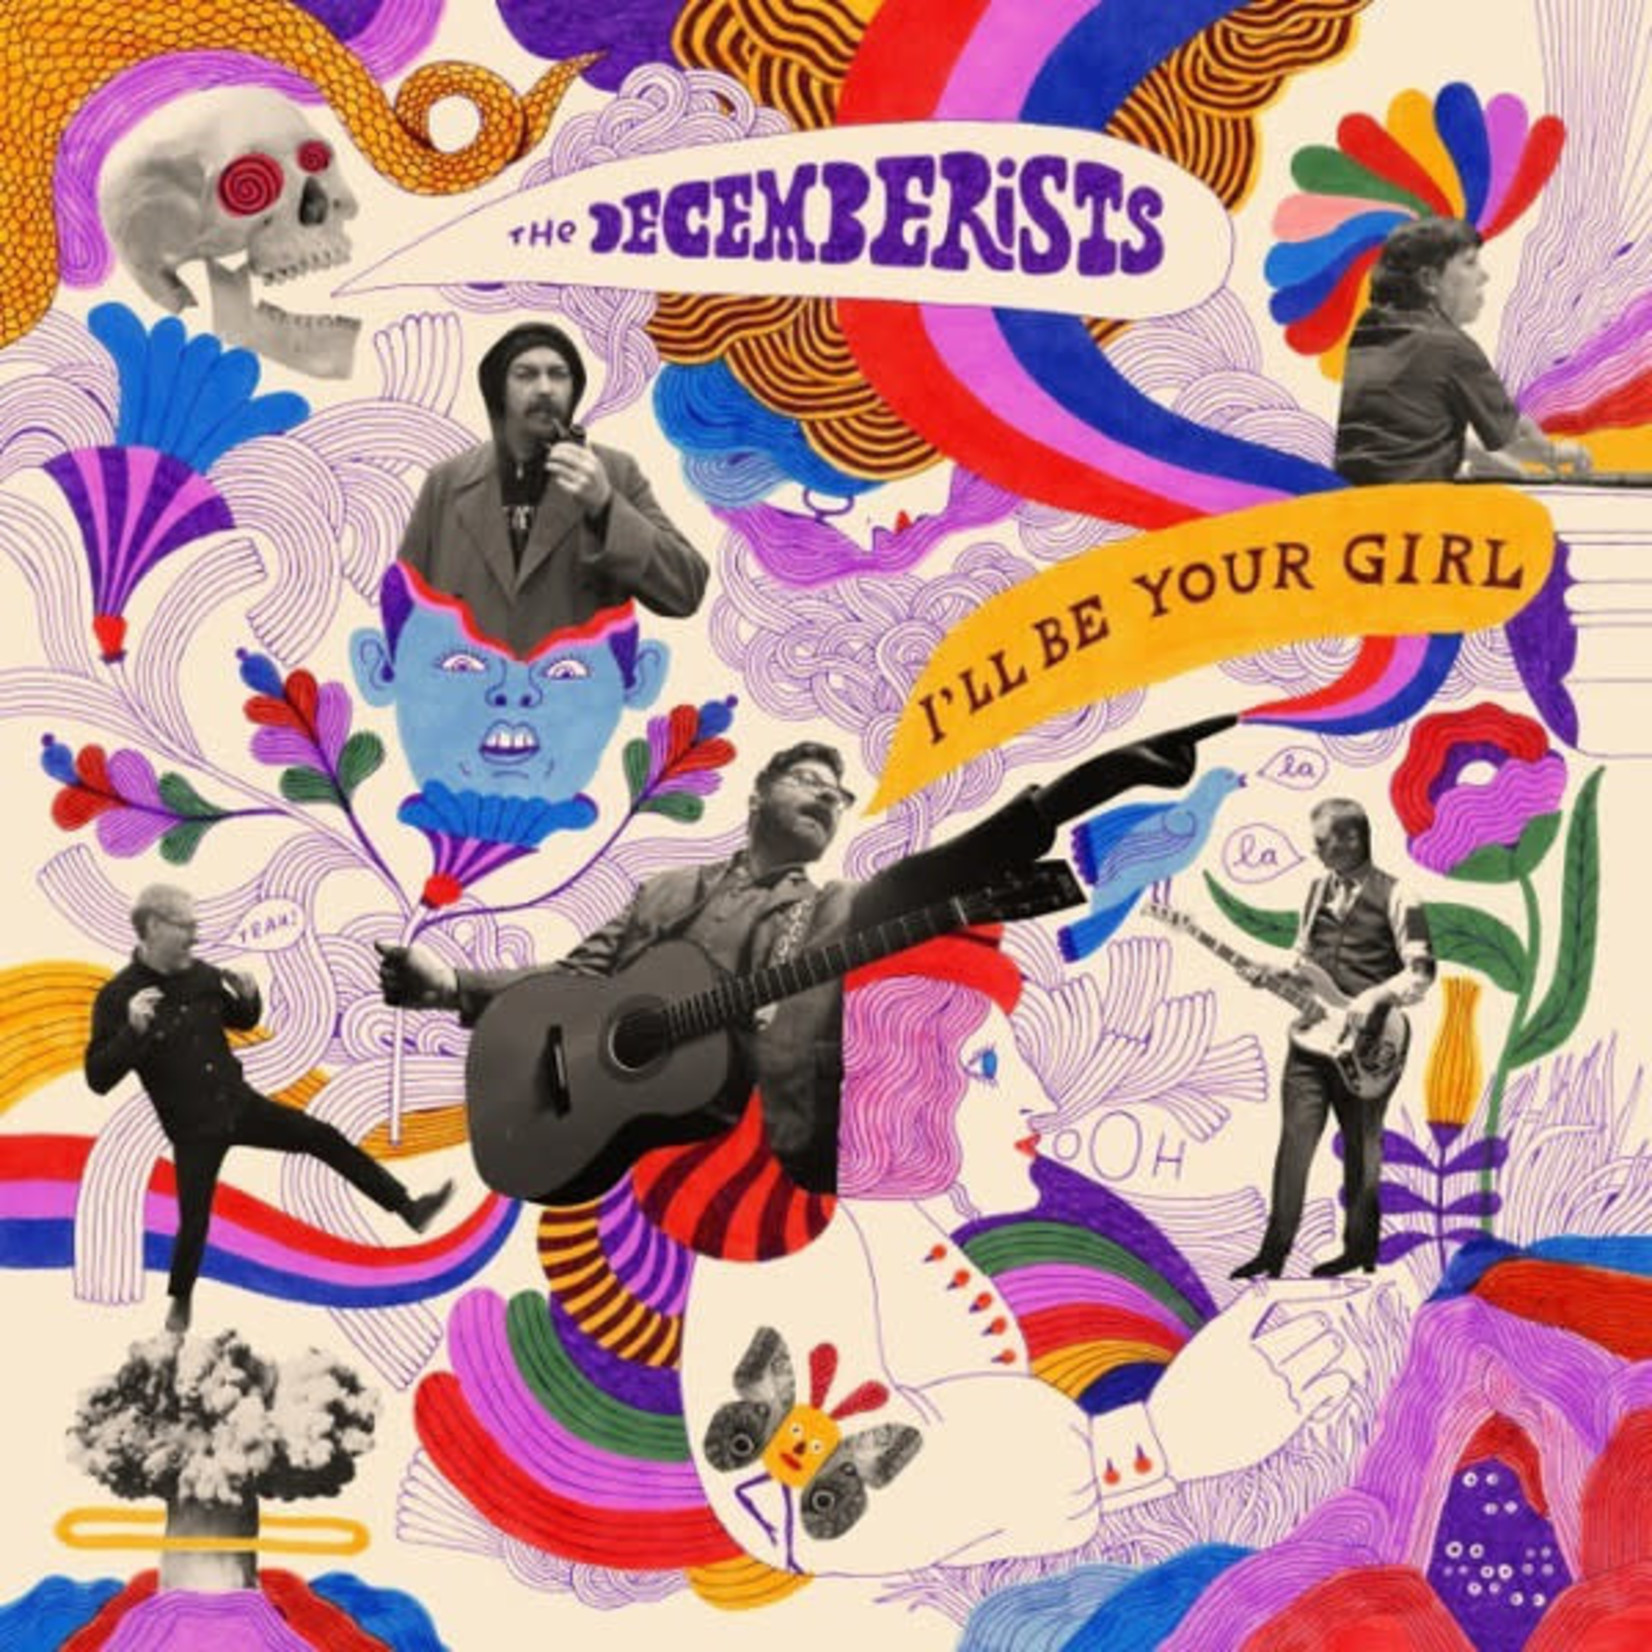 Capitol Decemberists - I'll Be Your Girl (LP)